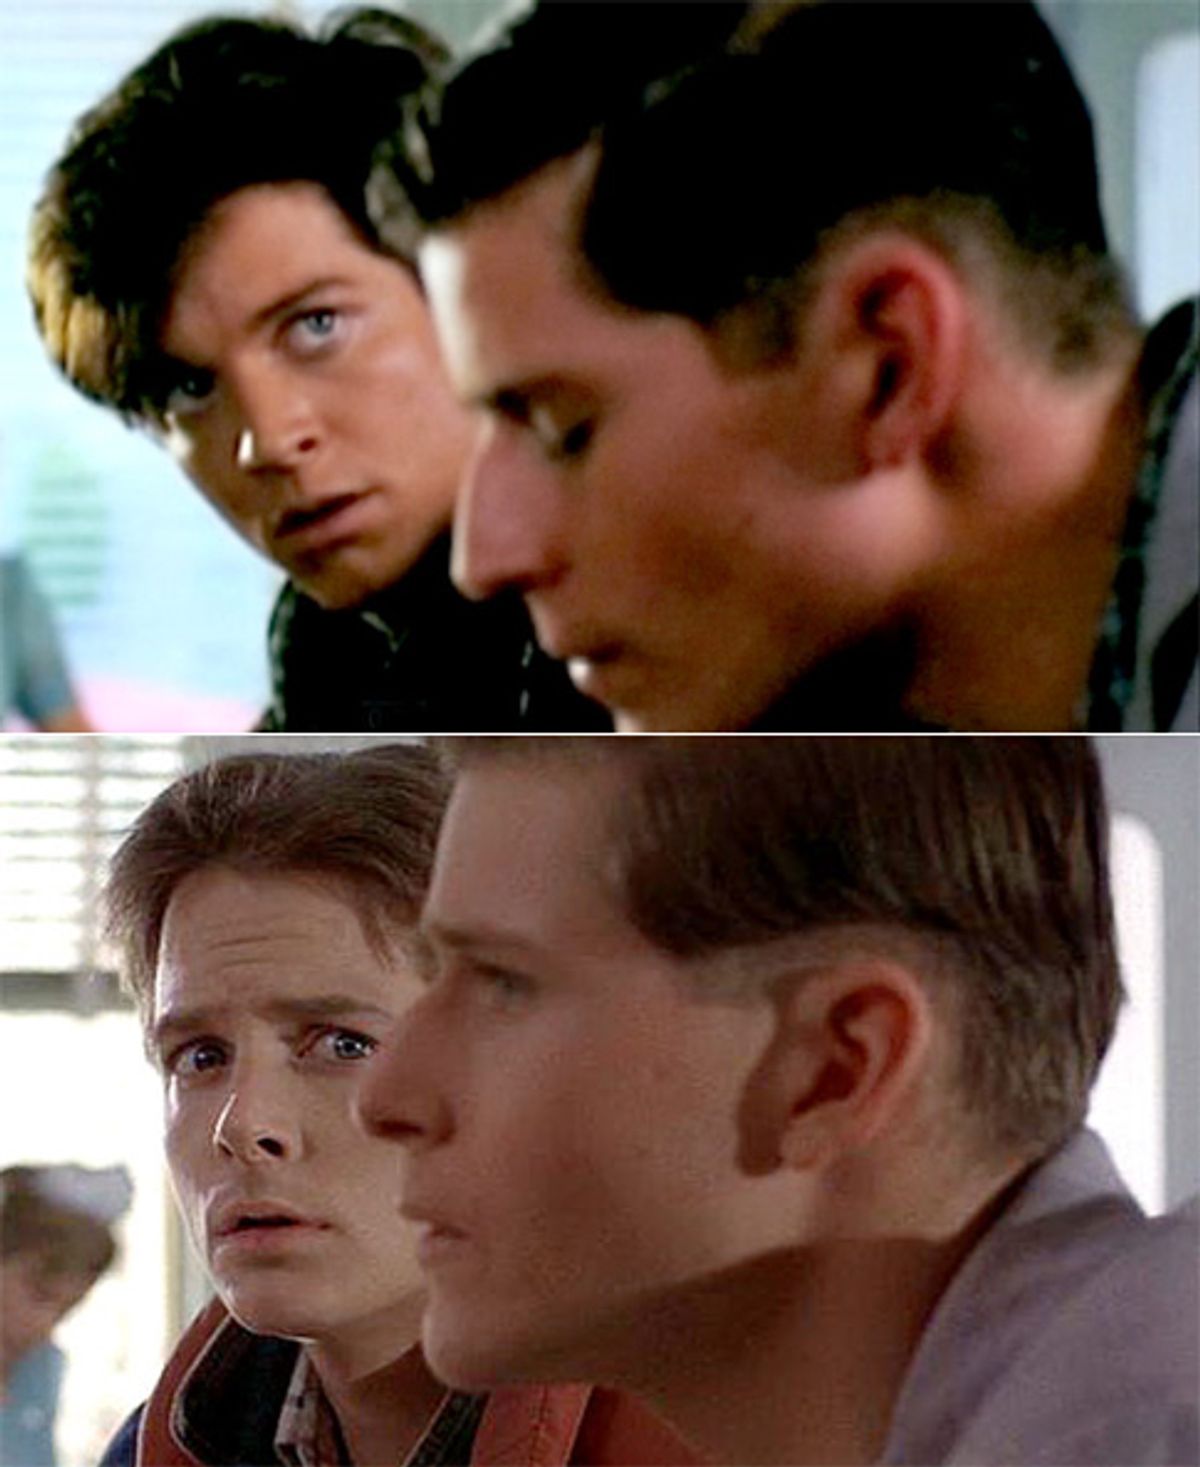 Eric Stoltz, not Michael J. Fox, was the original Marty McFly